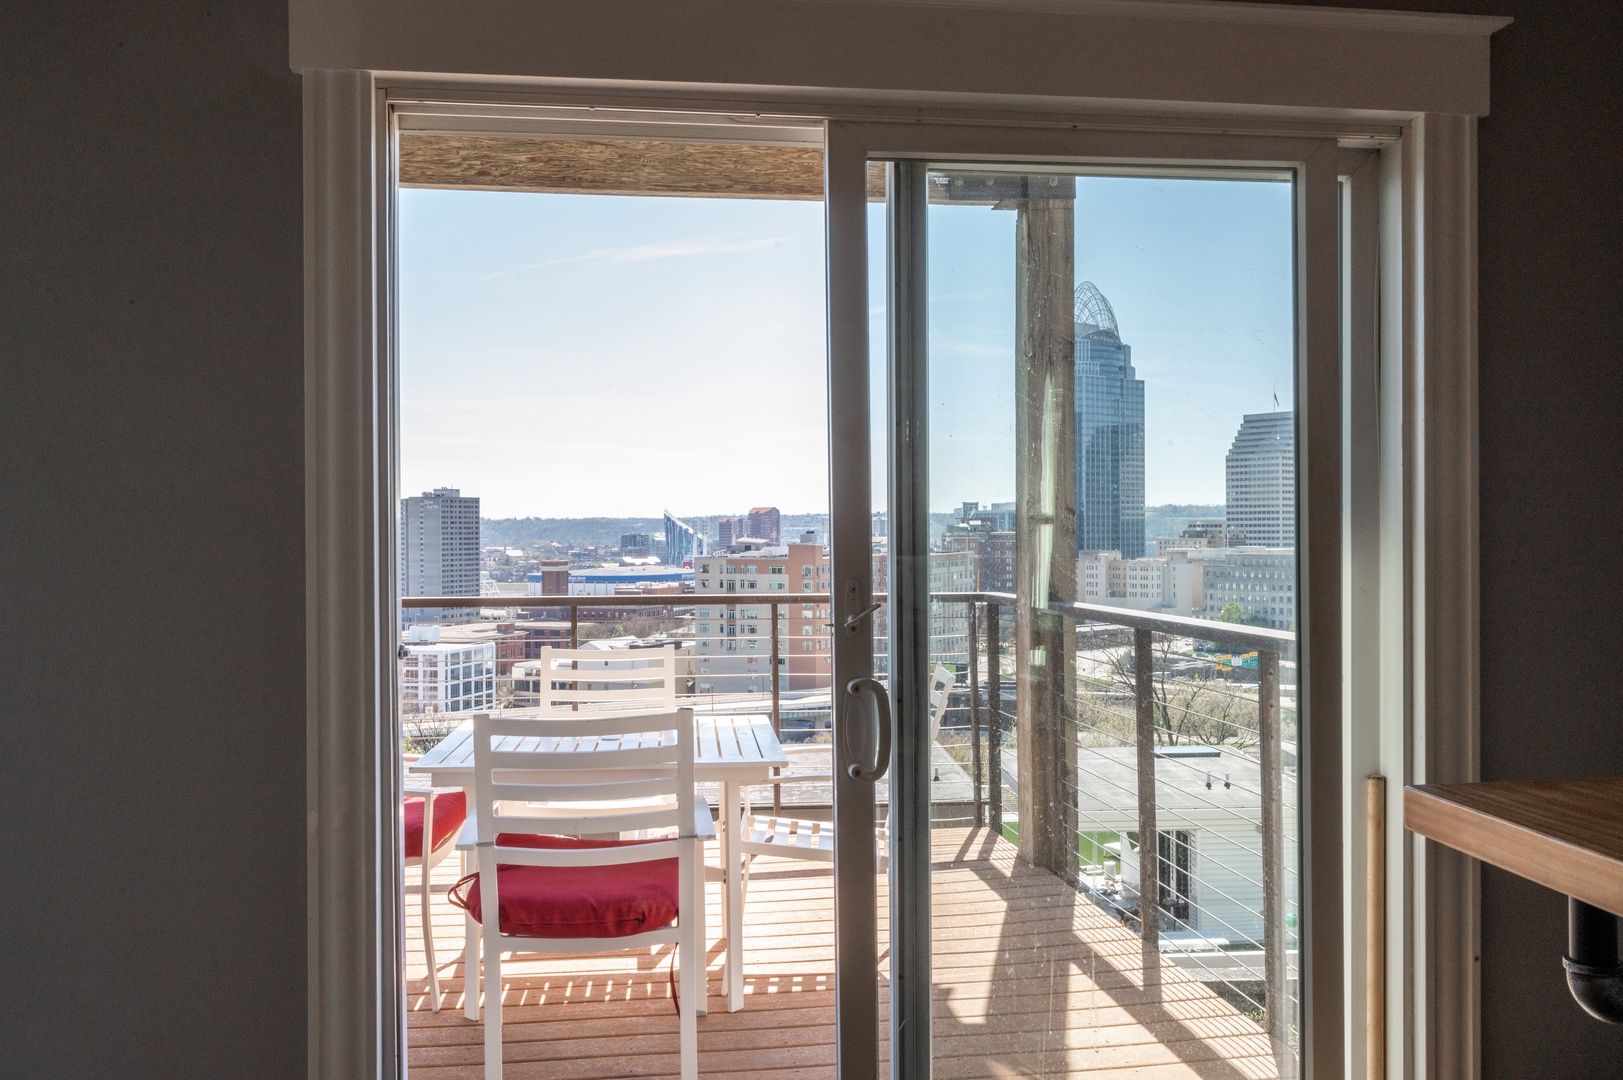 Head out to the back deck with incredible city views to enjoy meals and morning coffee